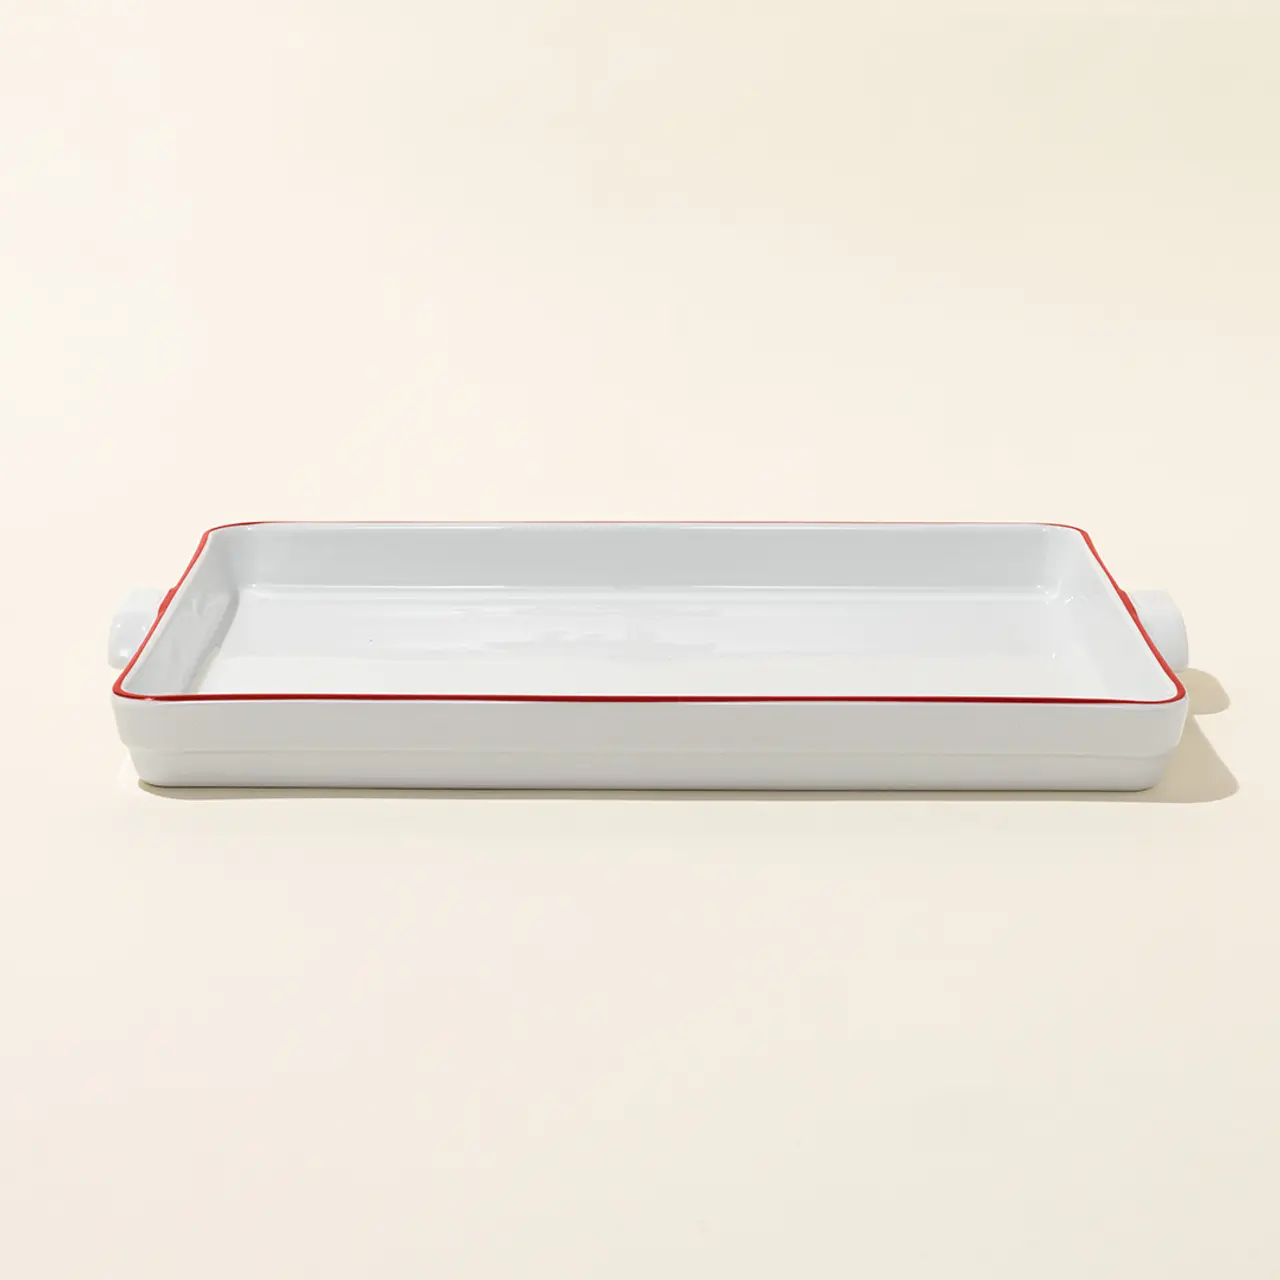 A rectangular, white ceramic baking dish with red trim sits on a neutral background.